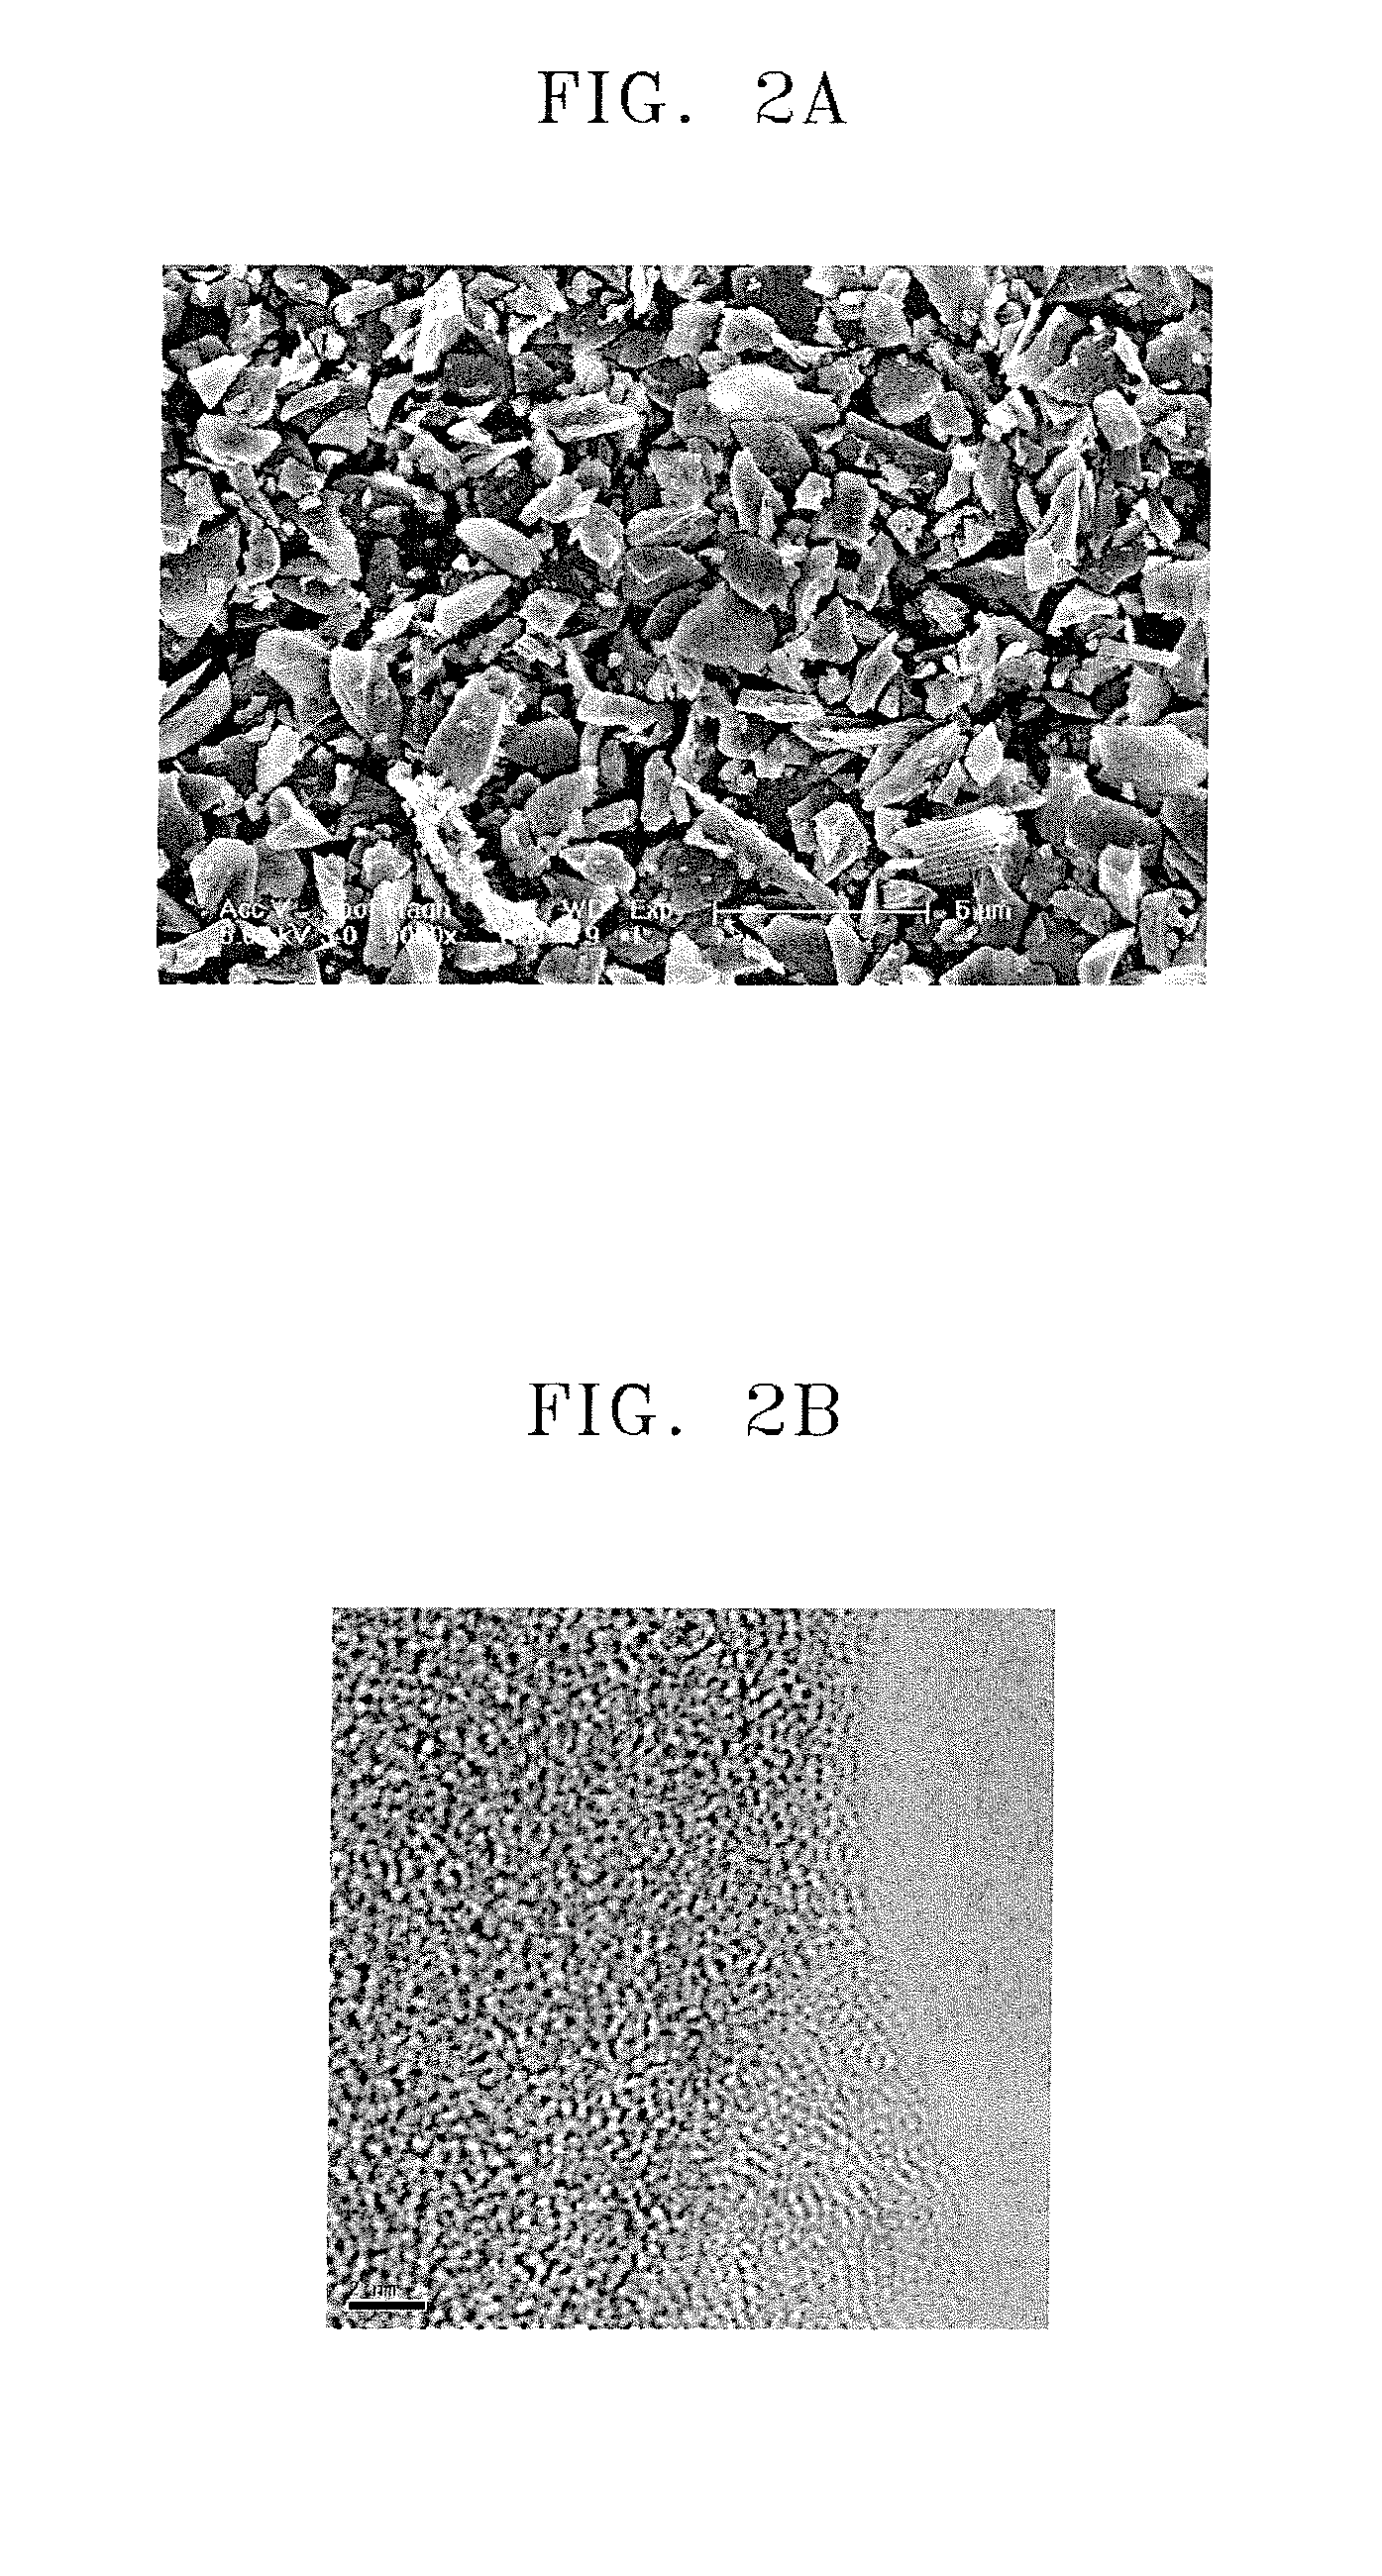 Composition for preparing emitter, method of preparing the emitter using the composition, emitter prepared using the method and electron emission device including the emitter